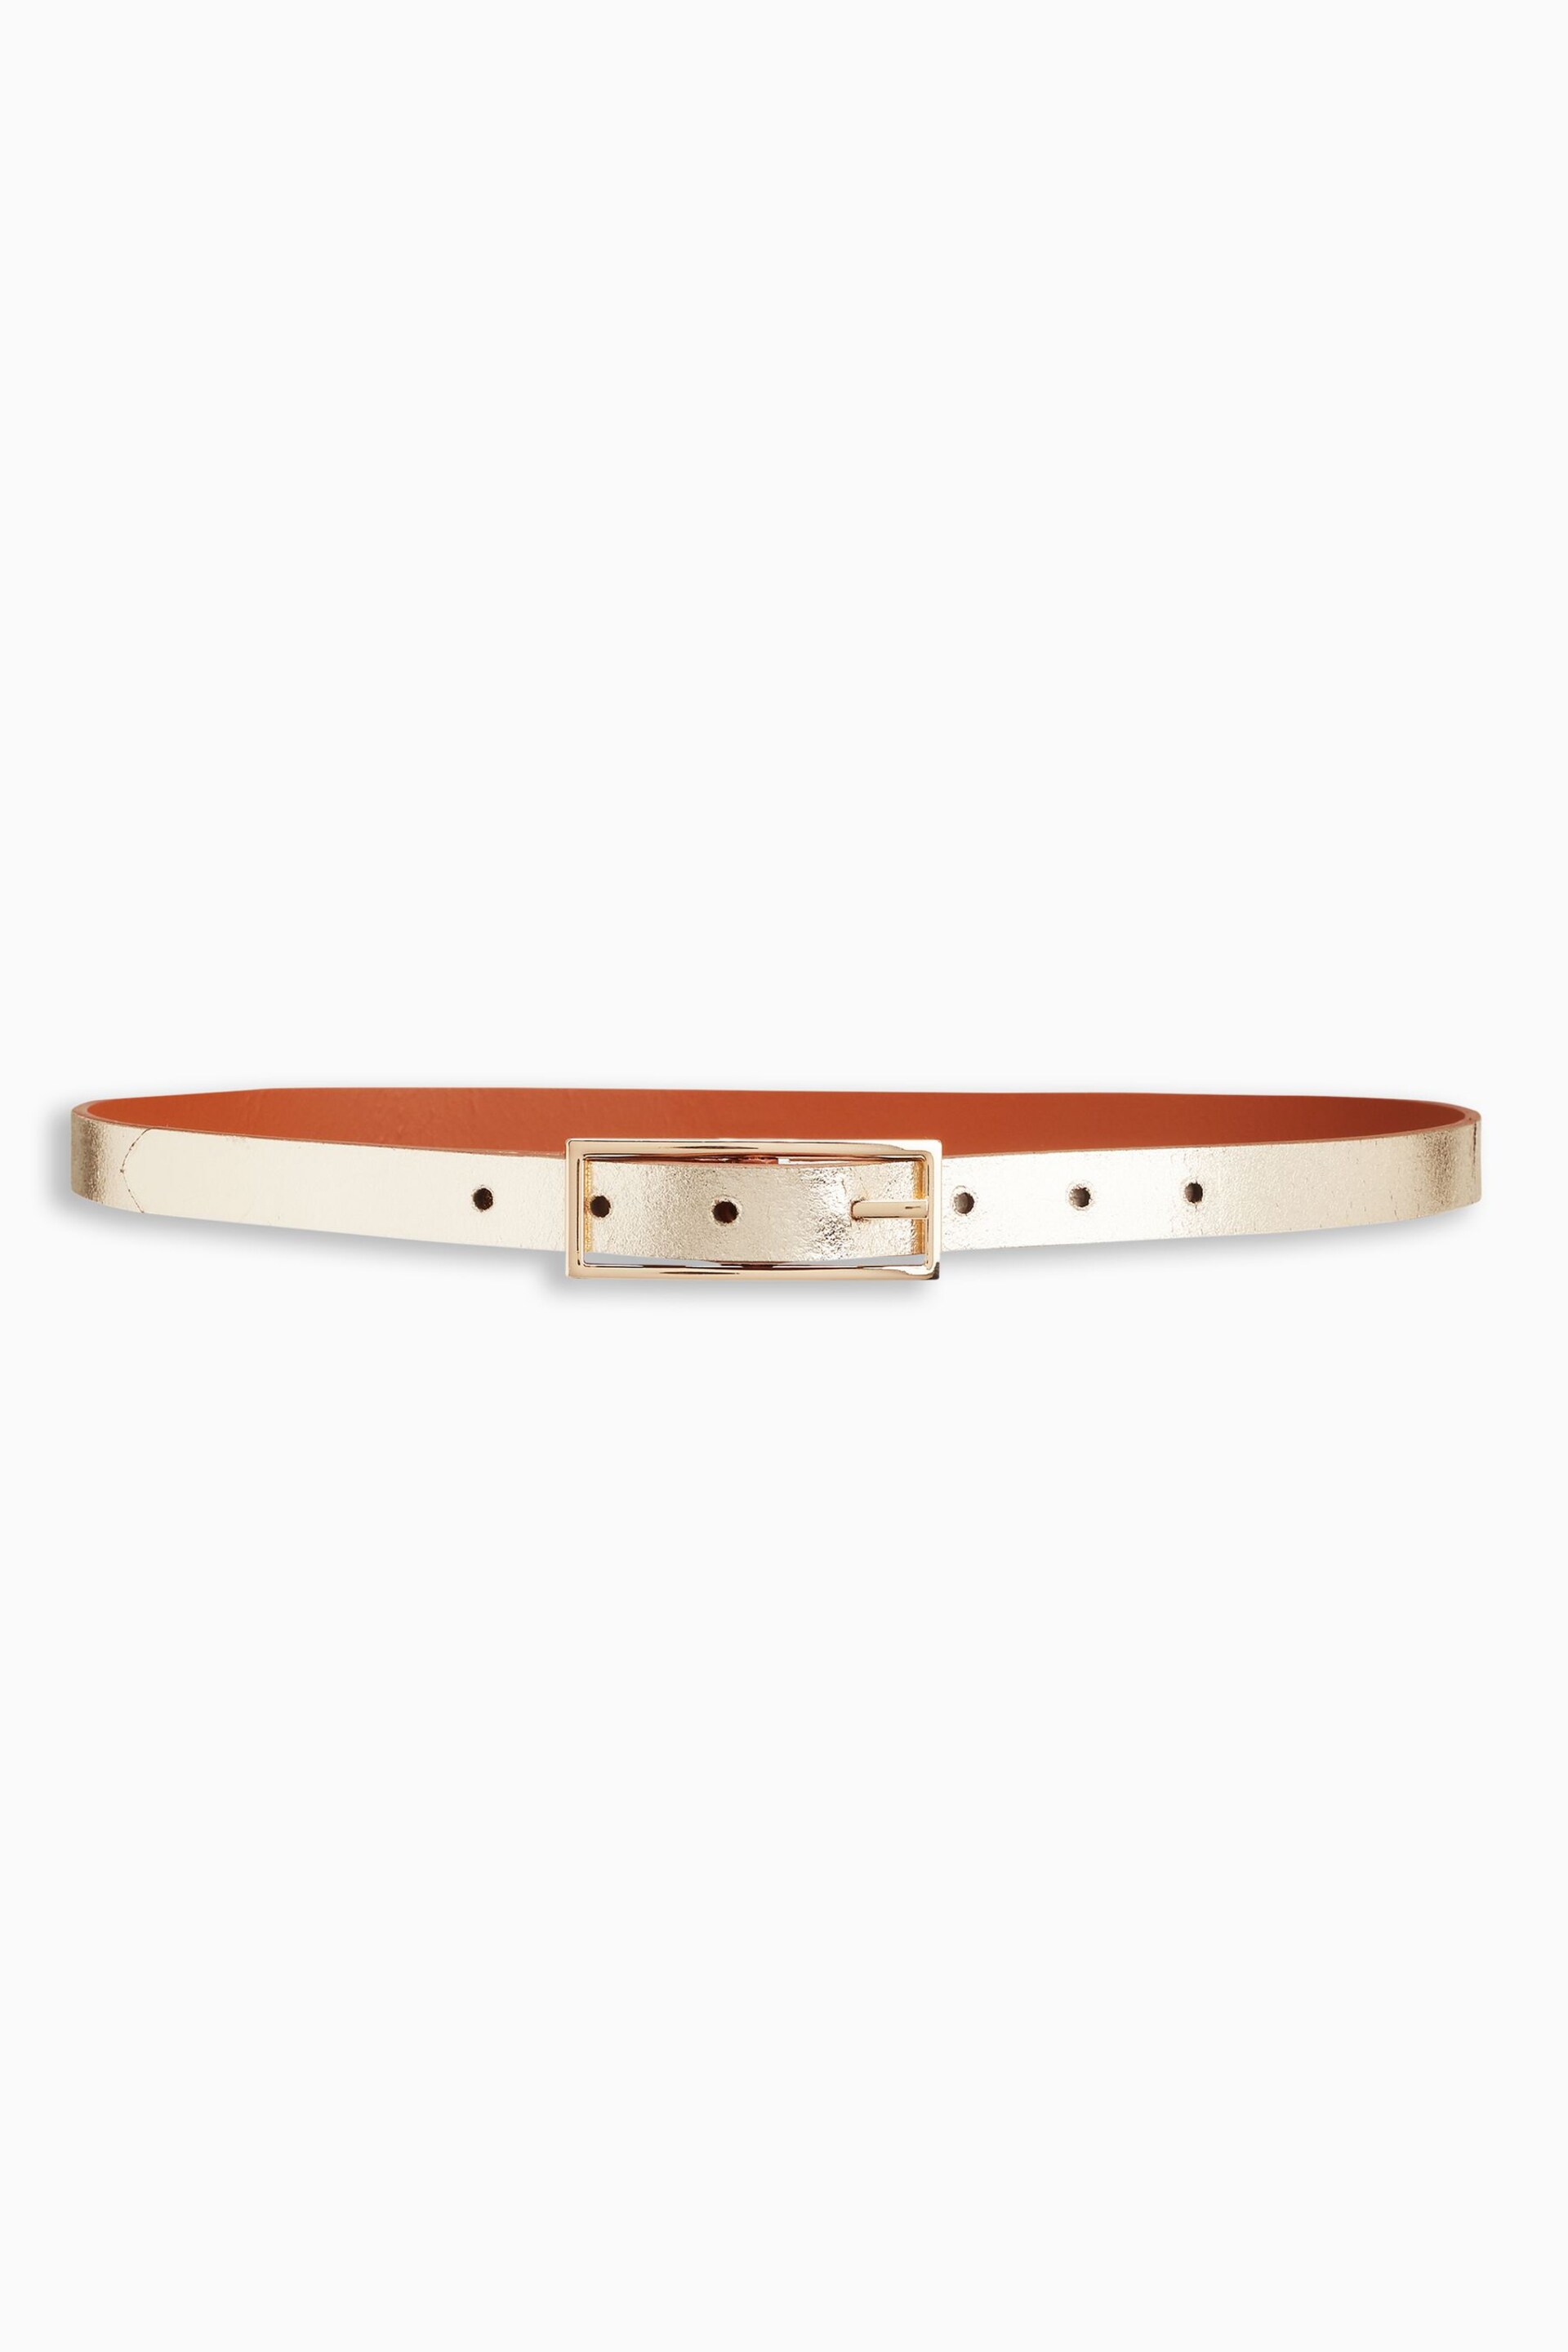 Tan/Gold Leather Reversible Jeans Belt - Image 3 of 6